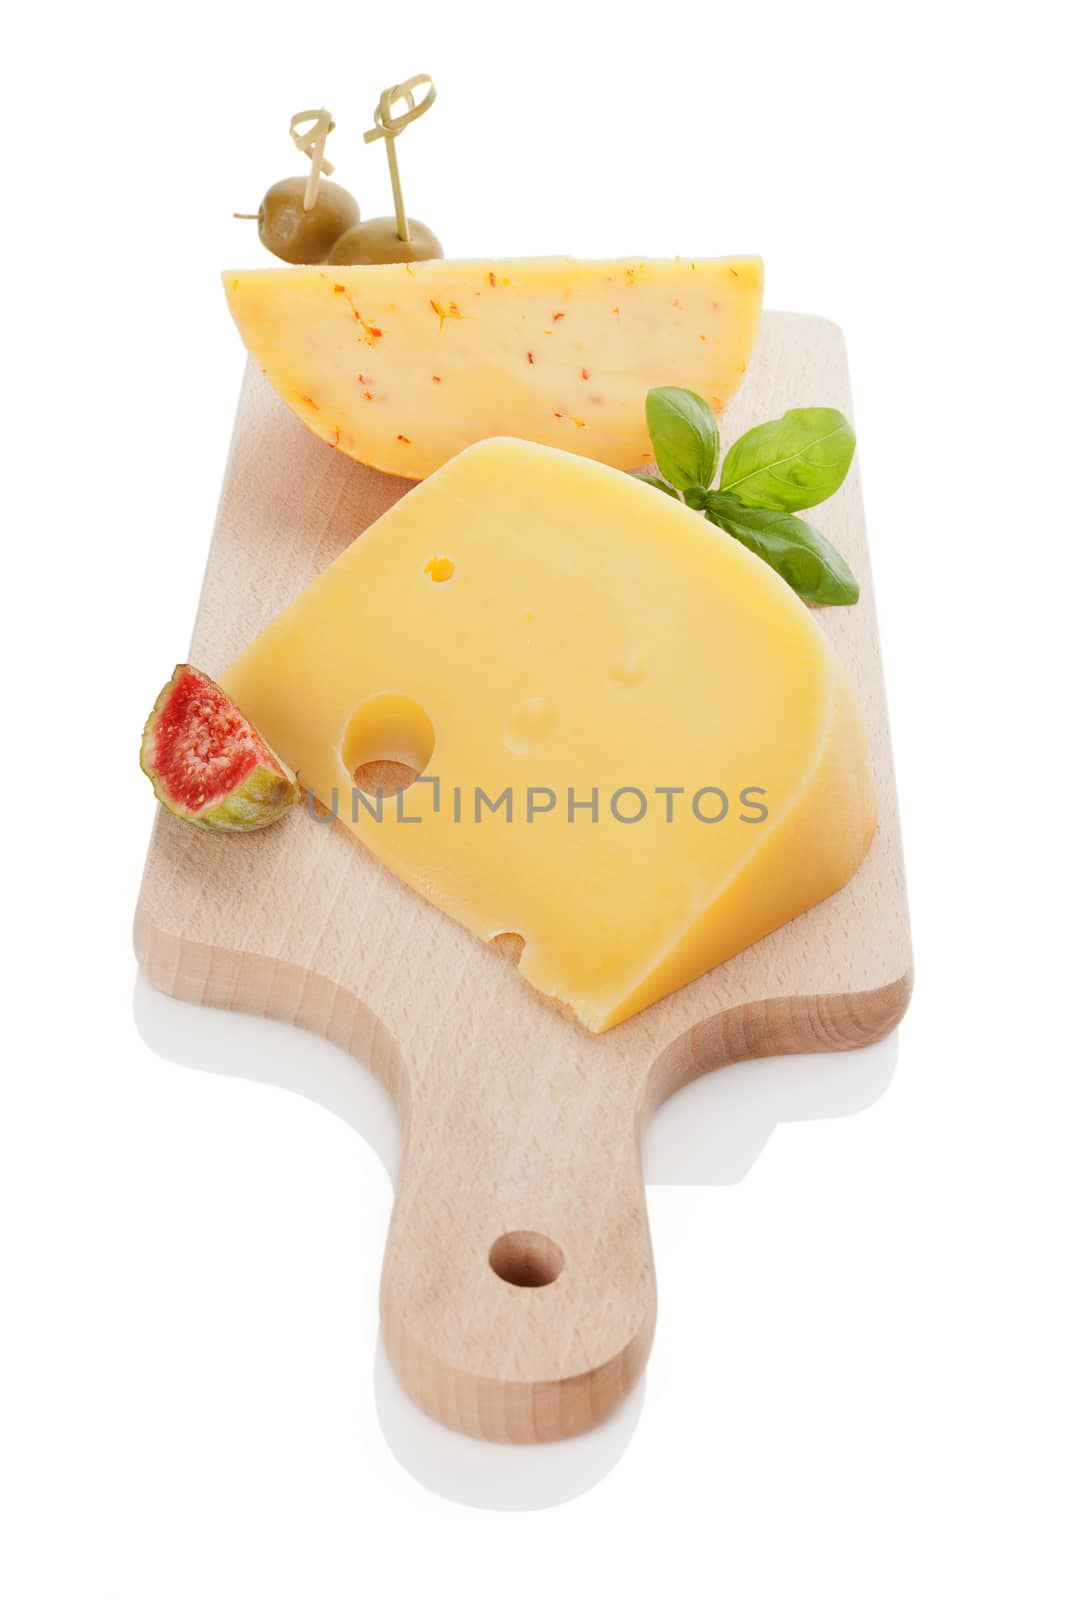 Swiss cheese emmentaler and gouda with olive canape, tropical fruit fig and fresh basil leaves on wooden kitchen board isolated on white. Delicious cheese background.